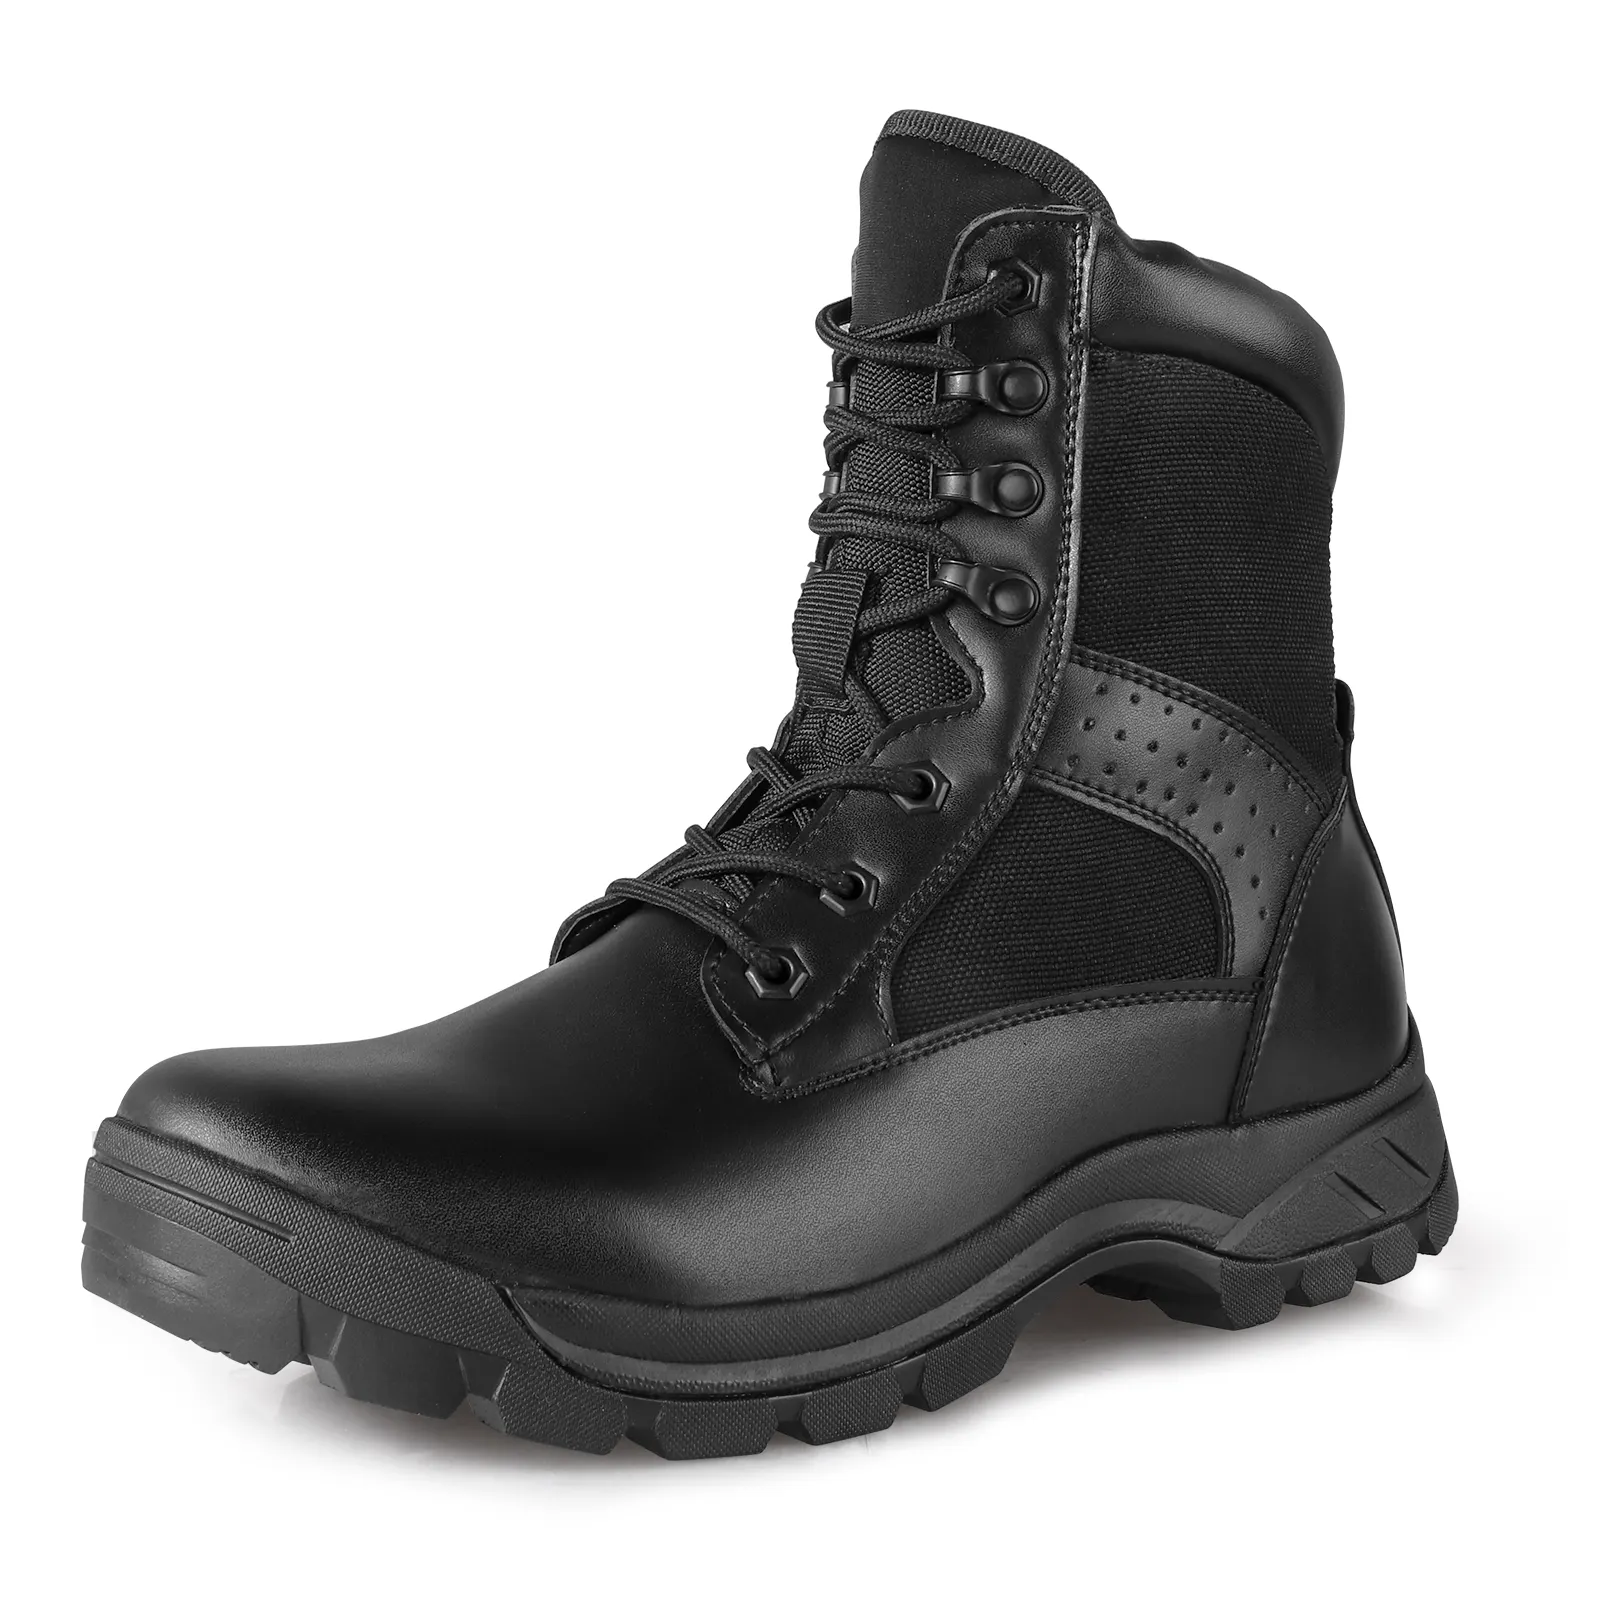 Cheap wholesale shoes camping shoes black leathers hiking boots tactical boots for men